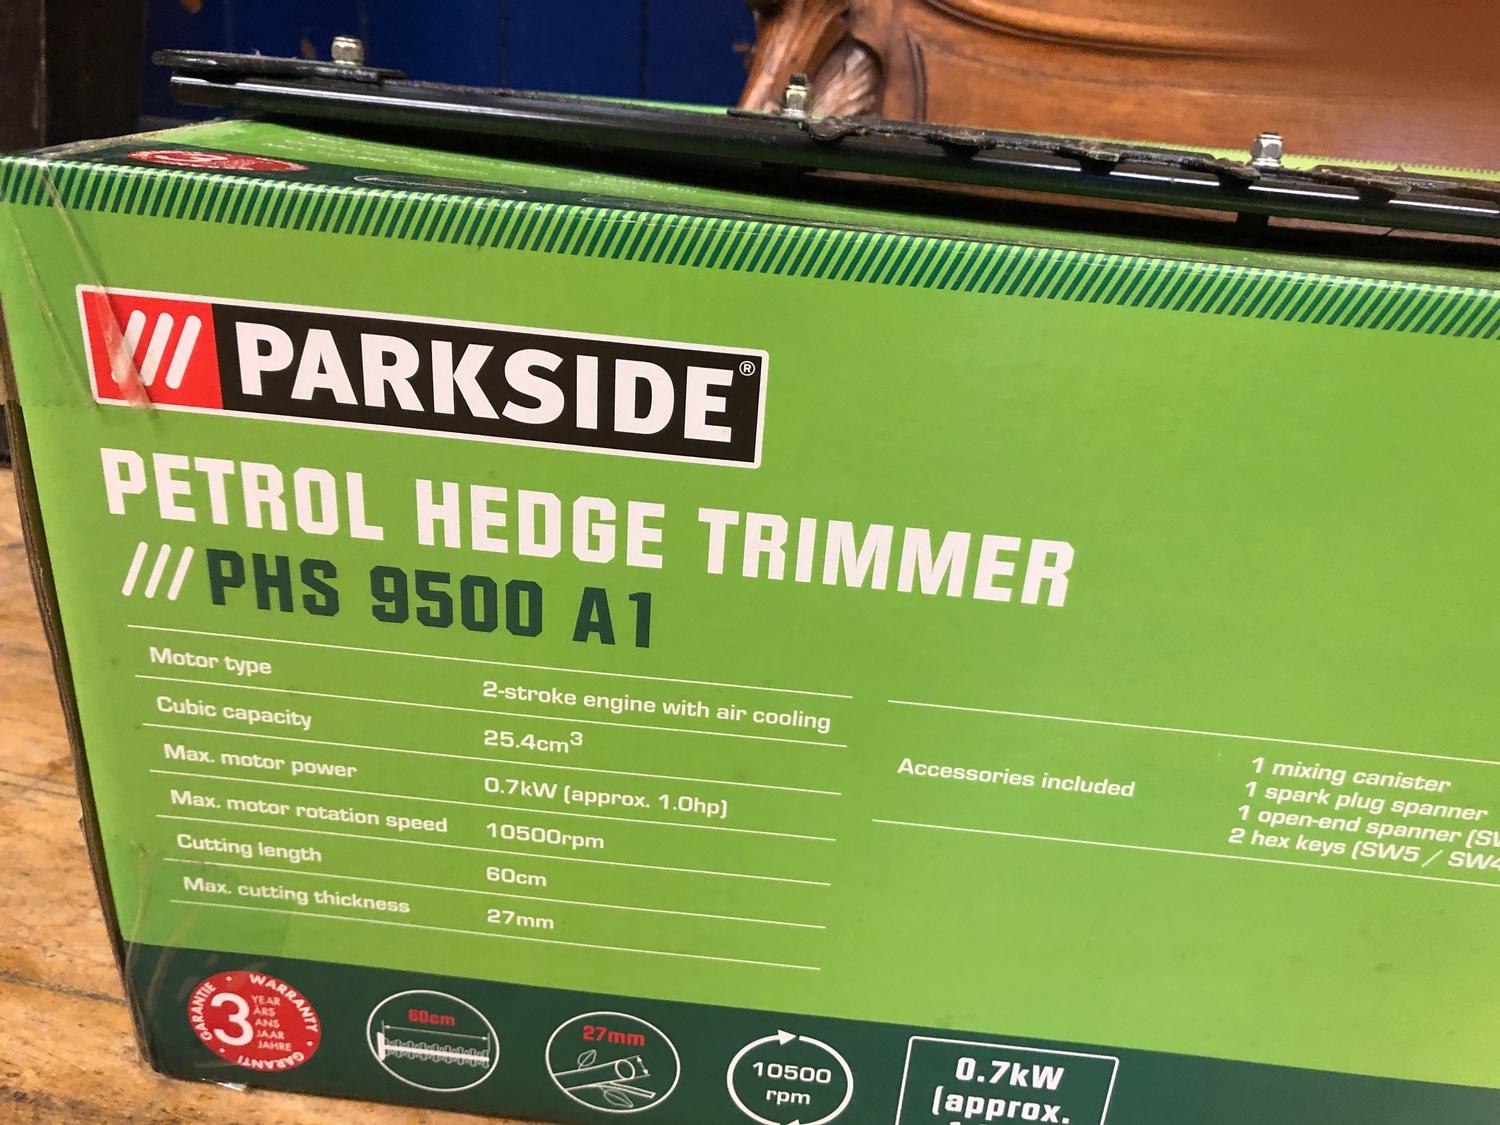 A Parkside petrol hedge trimmer PHS 9500 A1, with box - Image 3 of 3